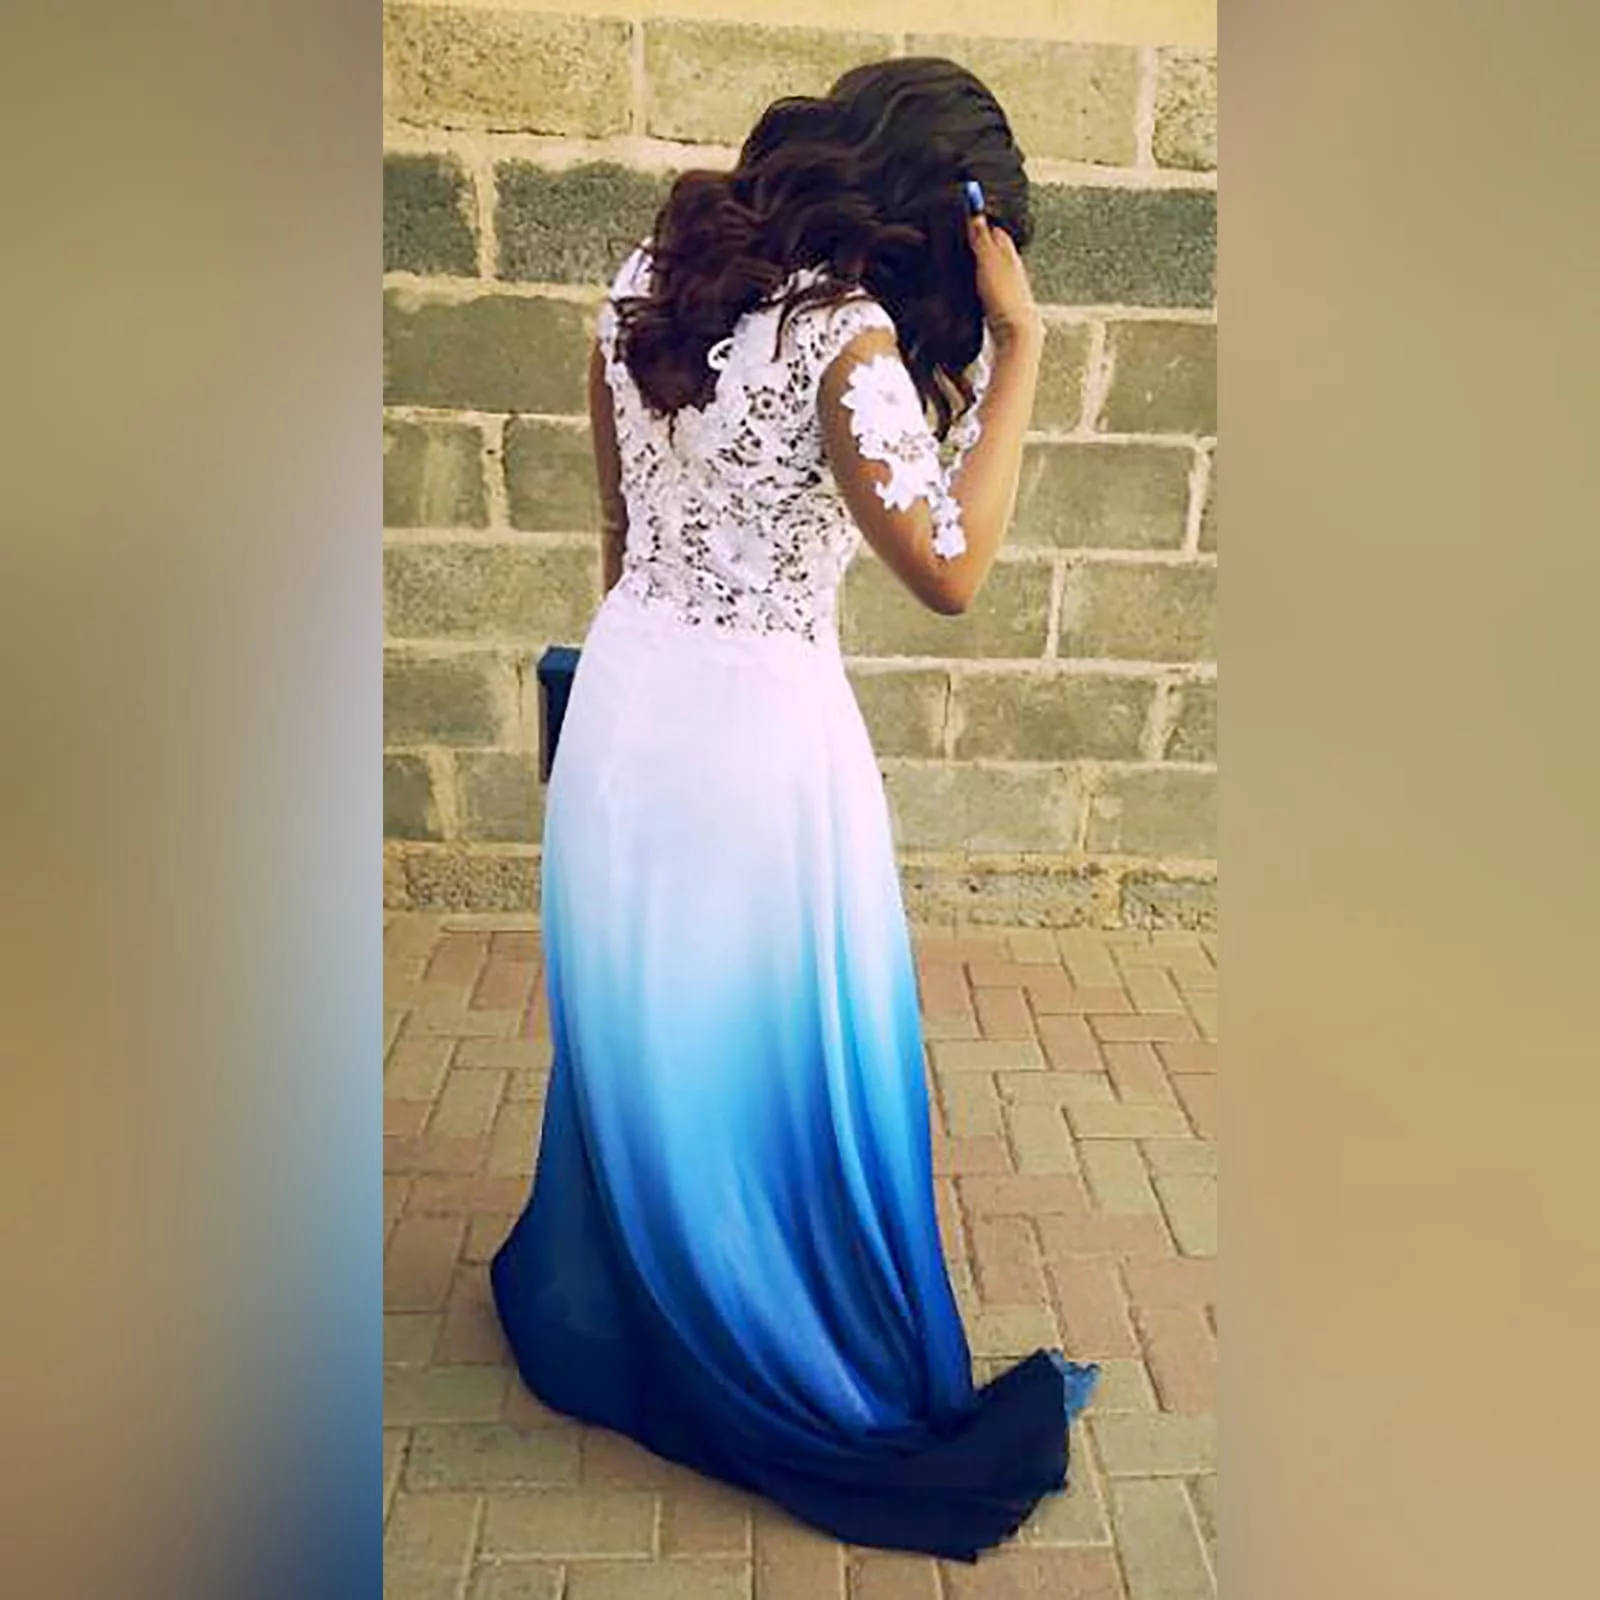 Gorgeous blue and white ombre flowy ceremony dress 2 a gorgeous blue and white ombre flowy ceremony dress created for a matric dance night. With a classy white bodice with elegant illusion lace sleeves. With a slit and a train